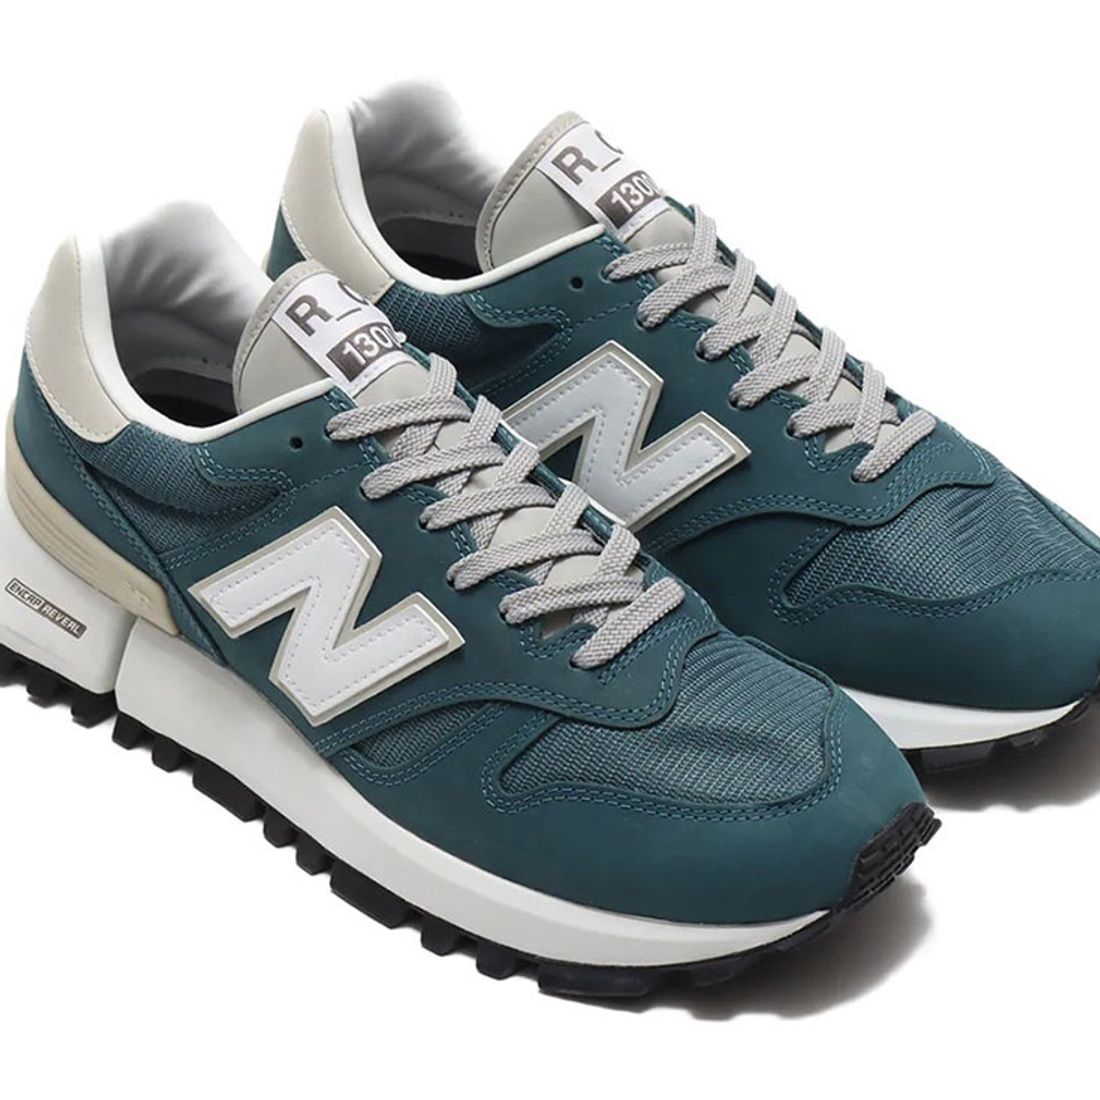 Nursery school chant fuel The New Balance RC_1300 is the Perfect Anachronism - Sneaker Freaker